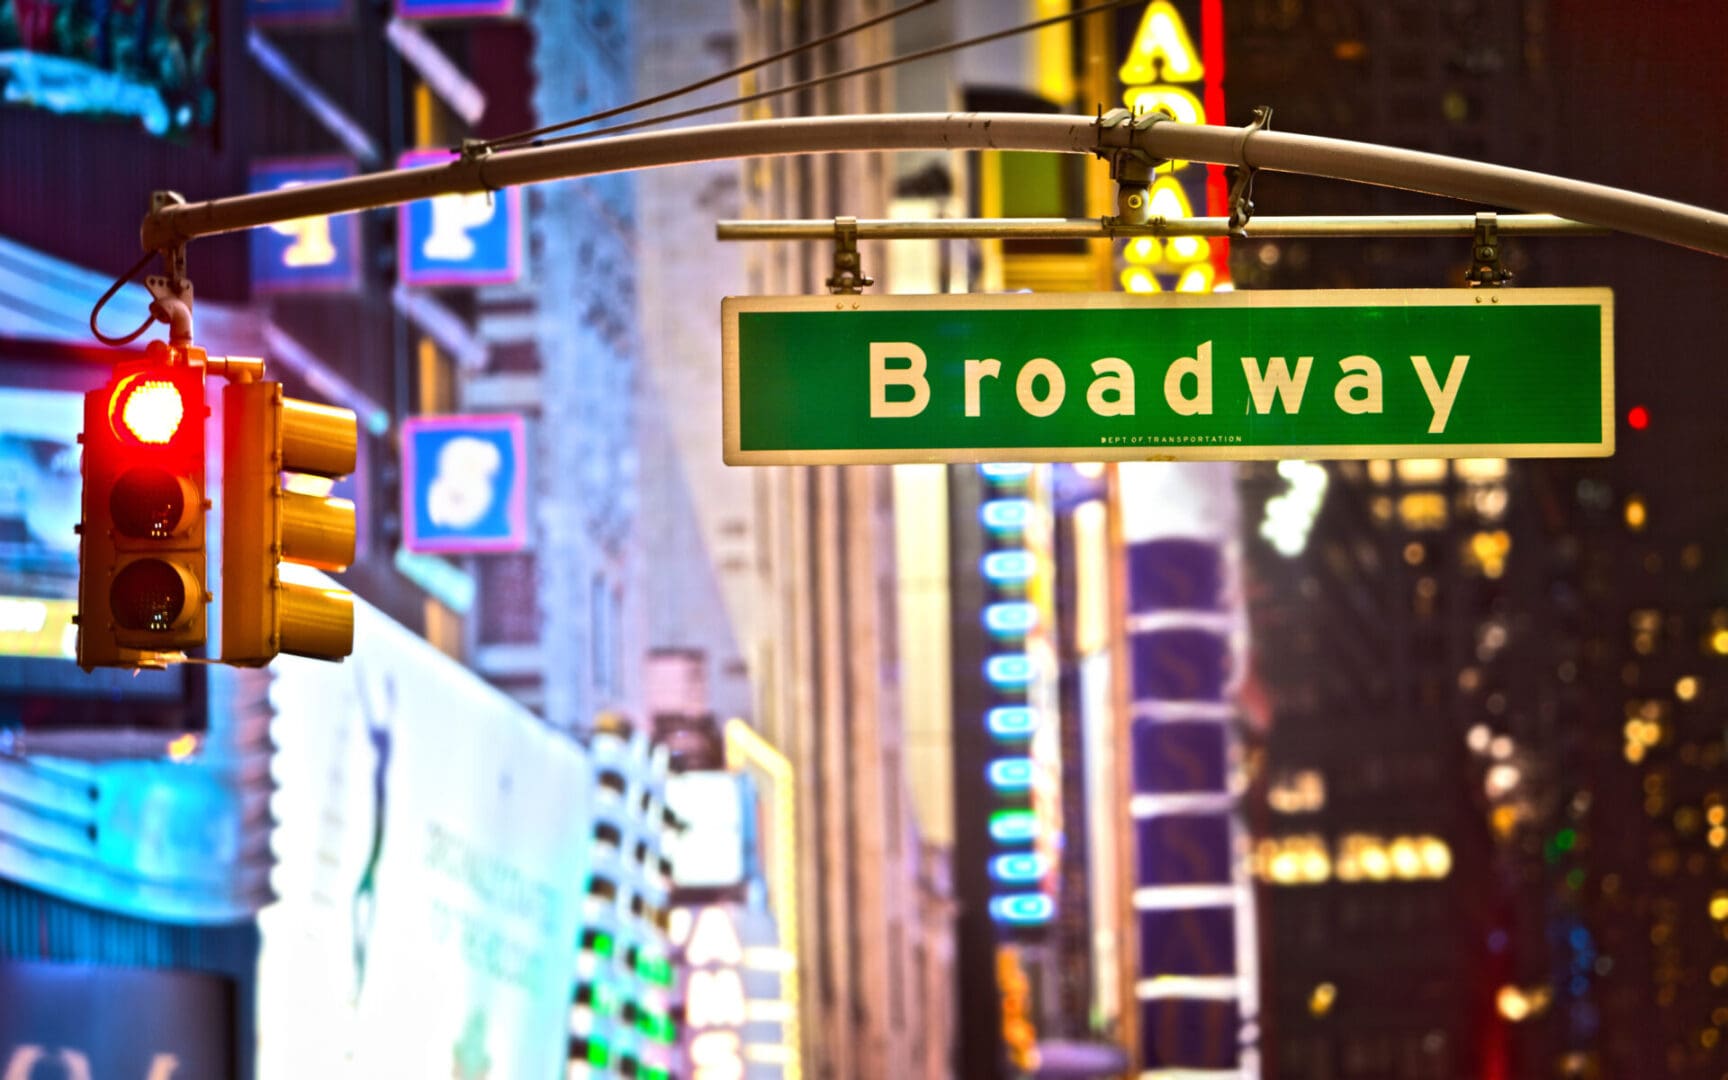 Illuminated "broadway" street sign and traffic light at night with blurred city lights in the background.